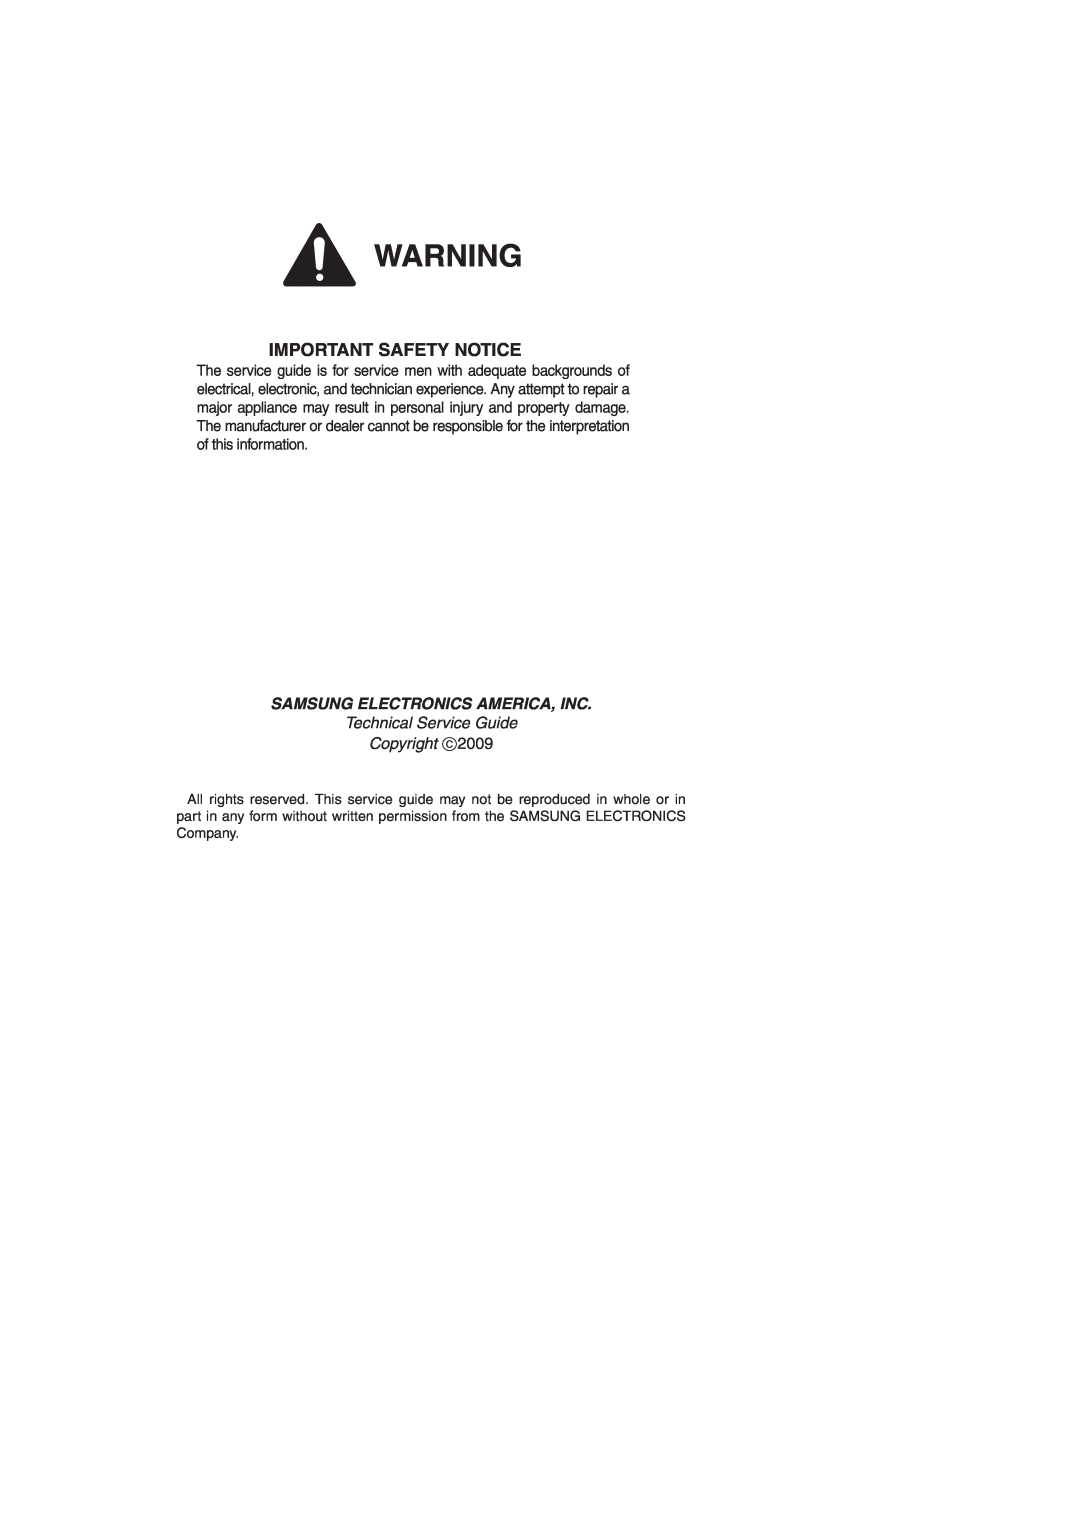 Samsung RF26XAERS, RF267AEBP Important Safety Notice, Samsung Electronics America, Inc, Technical Service Guide Copyright 